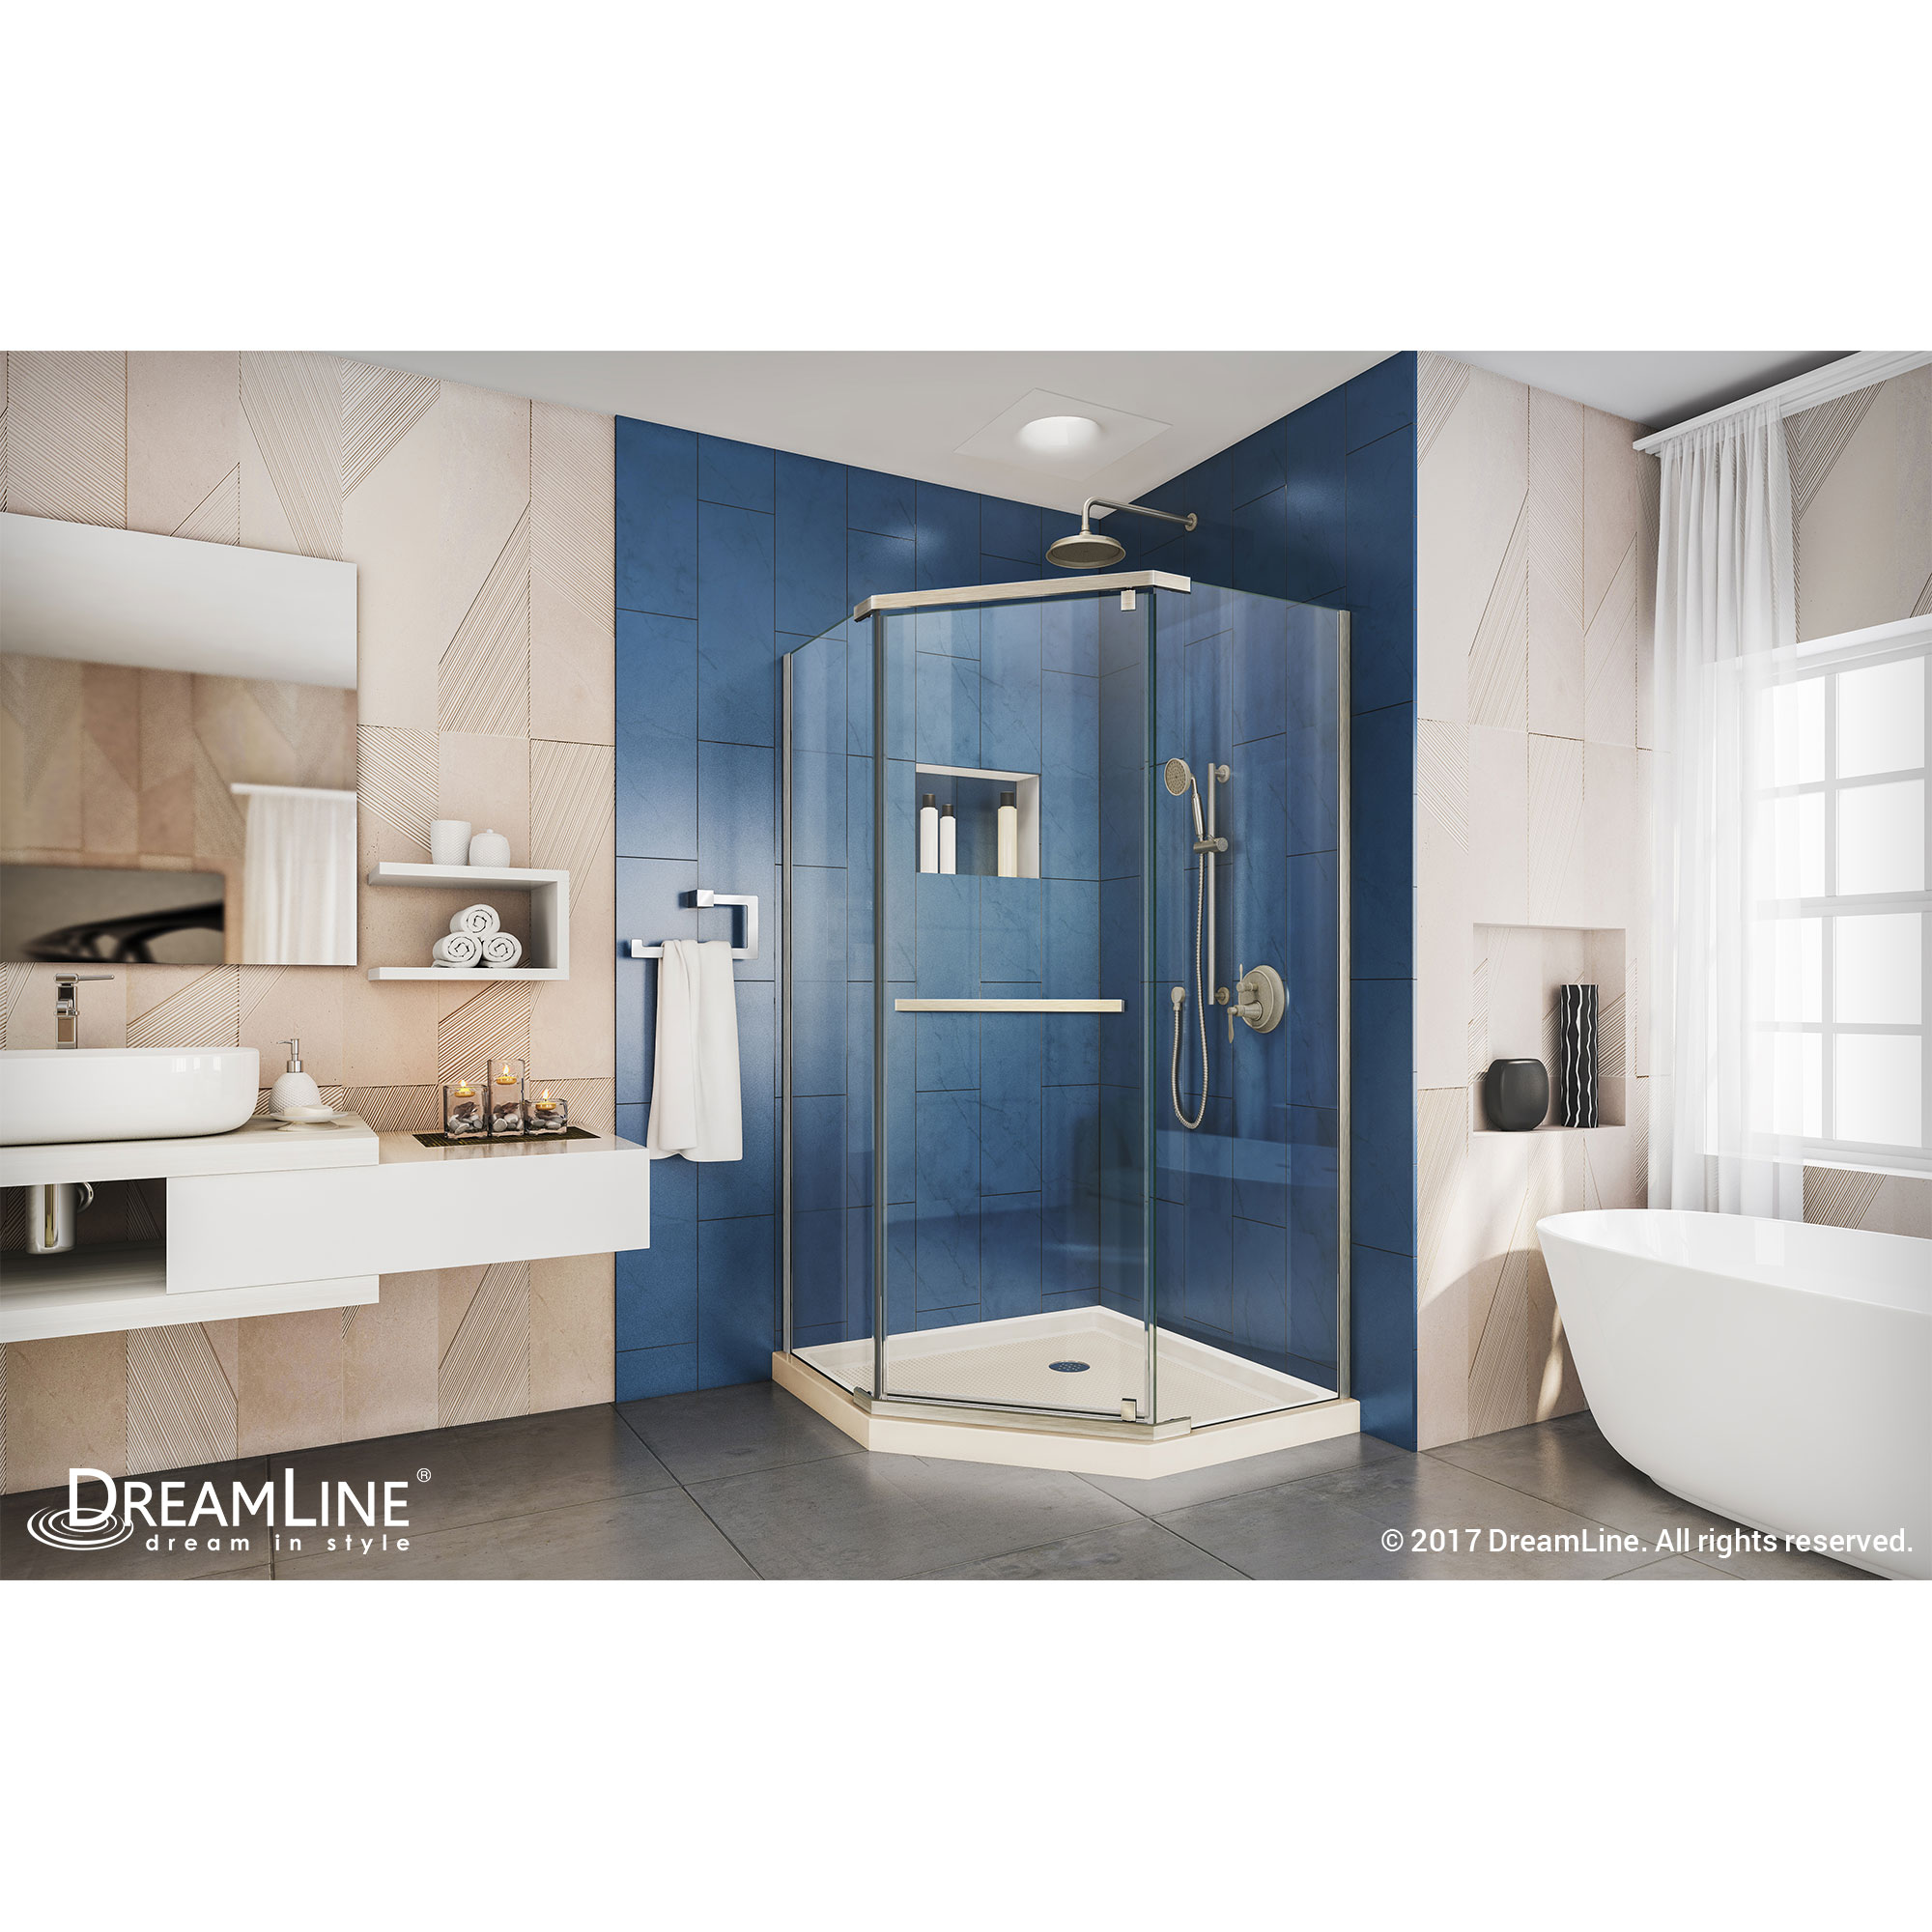 DreamLine Prism 40 in. D x 40 in. W x 74 3/4 H Pivot Shower Enclosure in Brushed Nickel and Corner Drain Biscuit Base Kit